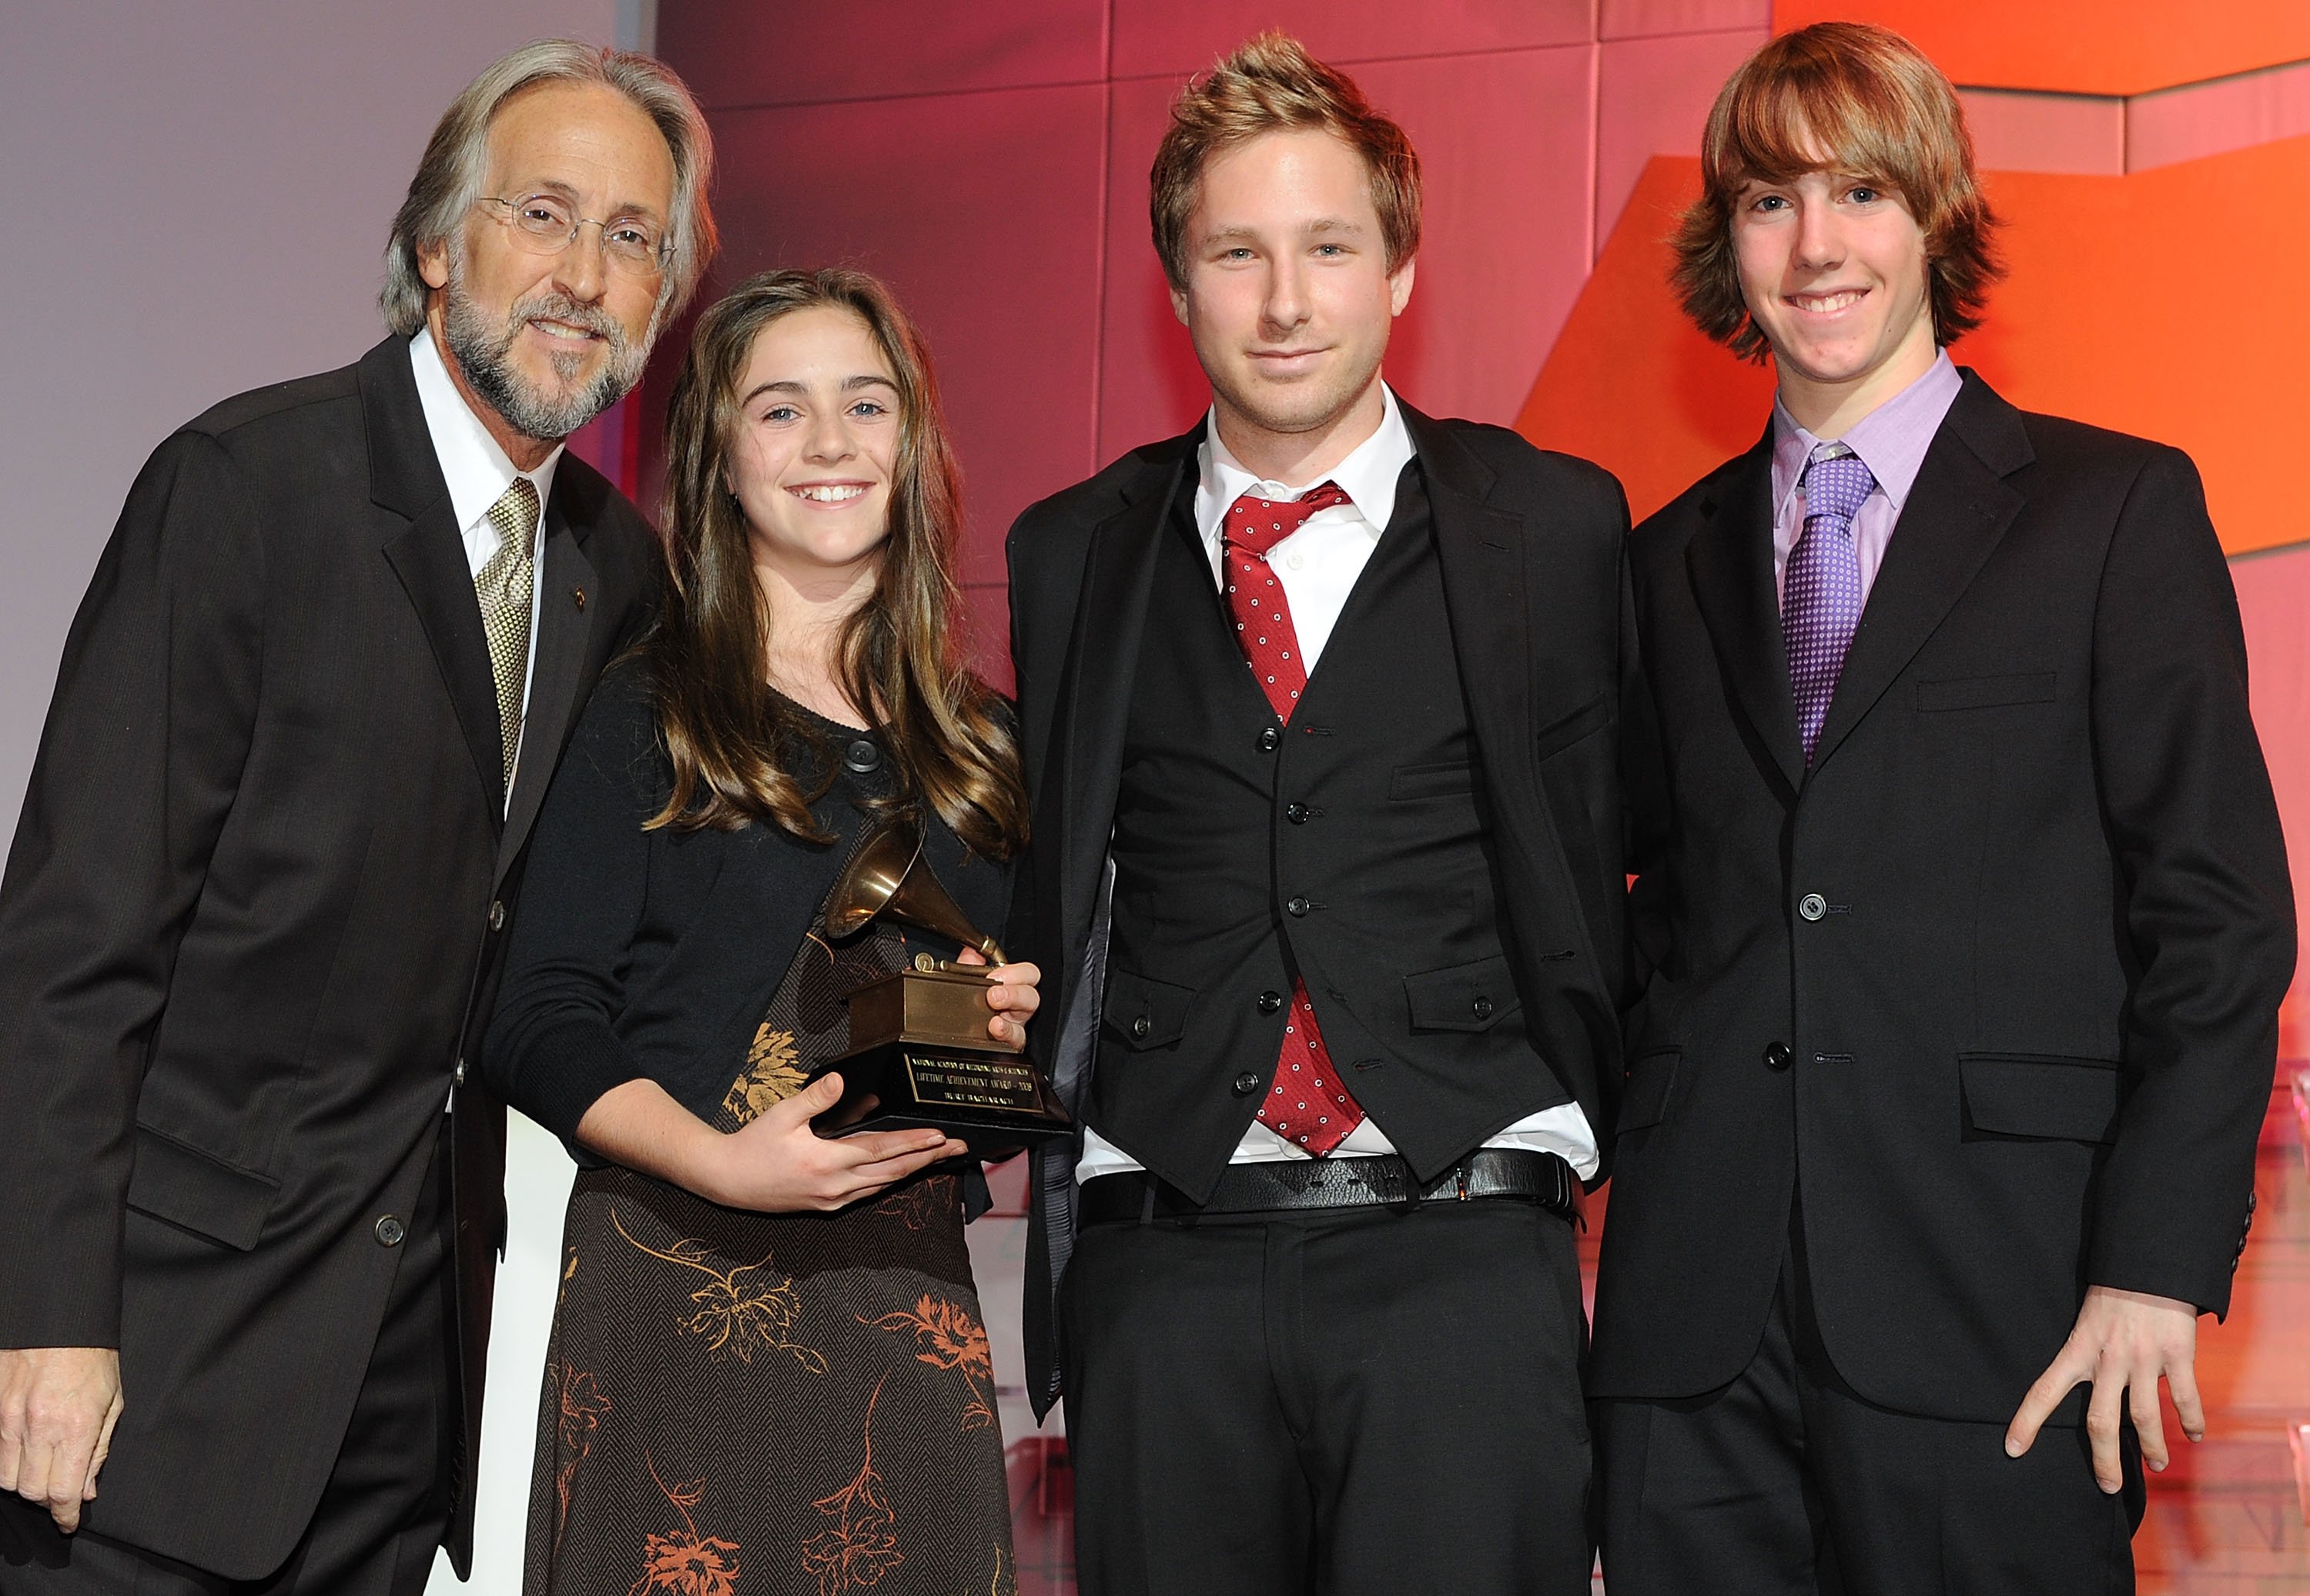 Raleigh, Oliver and Christopher Bacharach accept The Lifetime Achievement Award presented by Recording Academy President and CEO, Neil Portnow at The 50th Annual Grammy Awards, Special Merit Awards Cermony held at The Wilshire - Ebell Theater, in Los Angeles California, on February 9, 2008. | Source: Getty Images